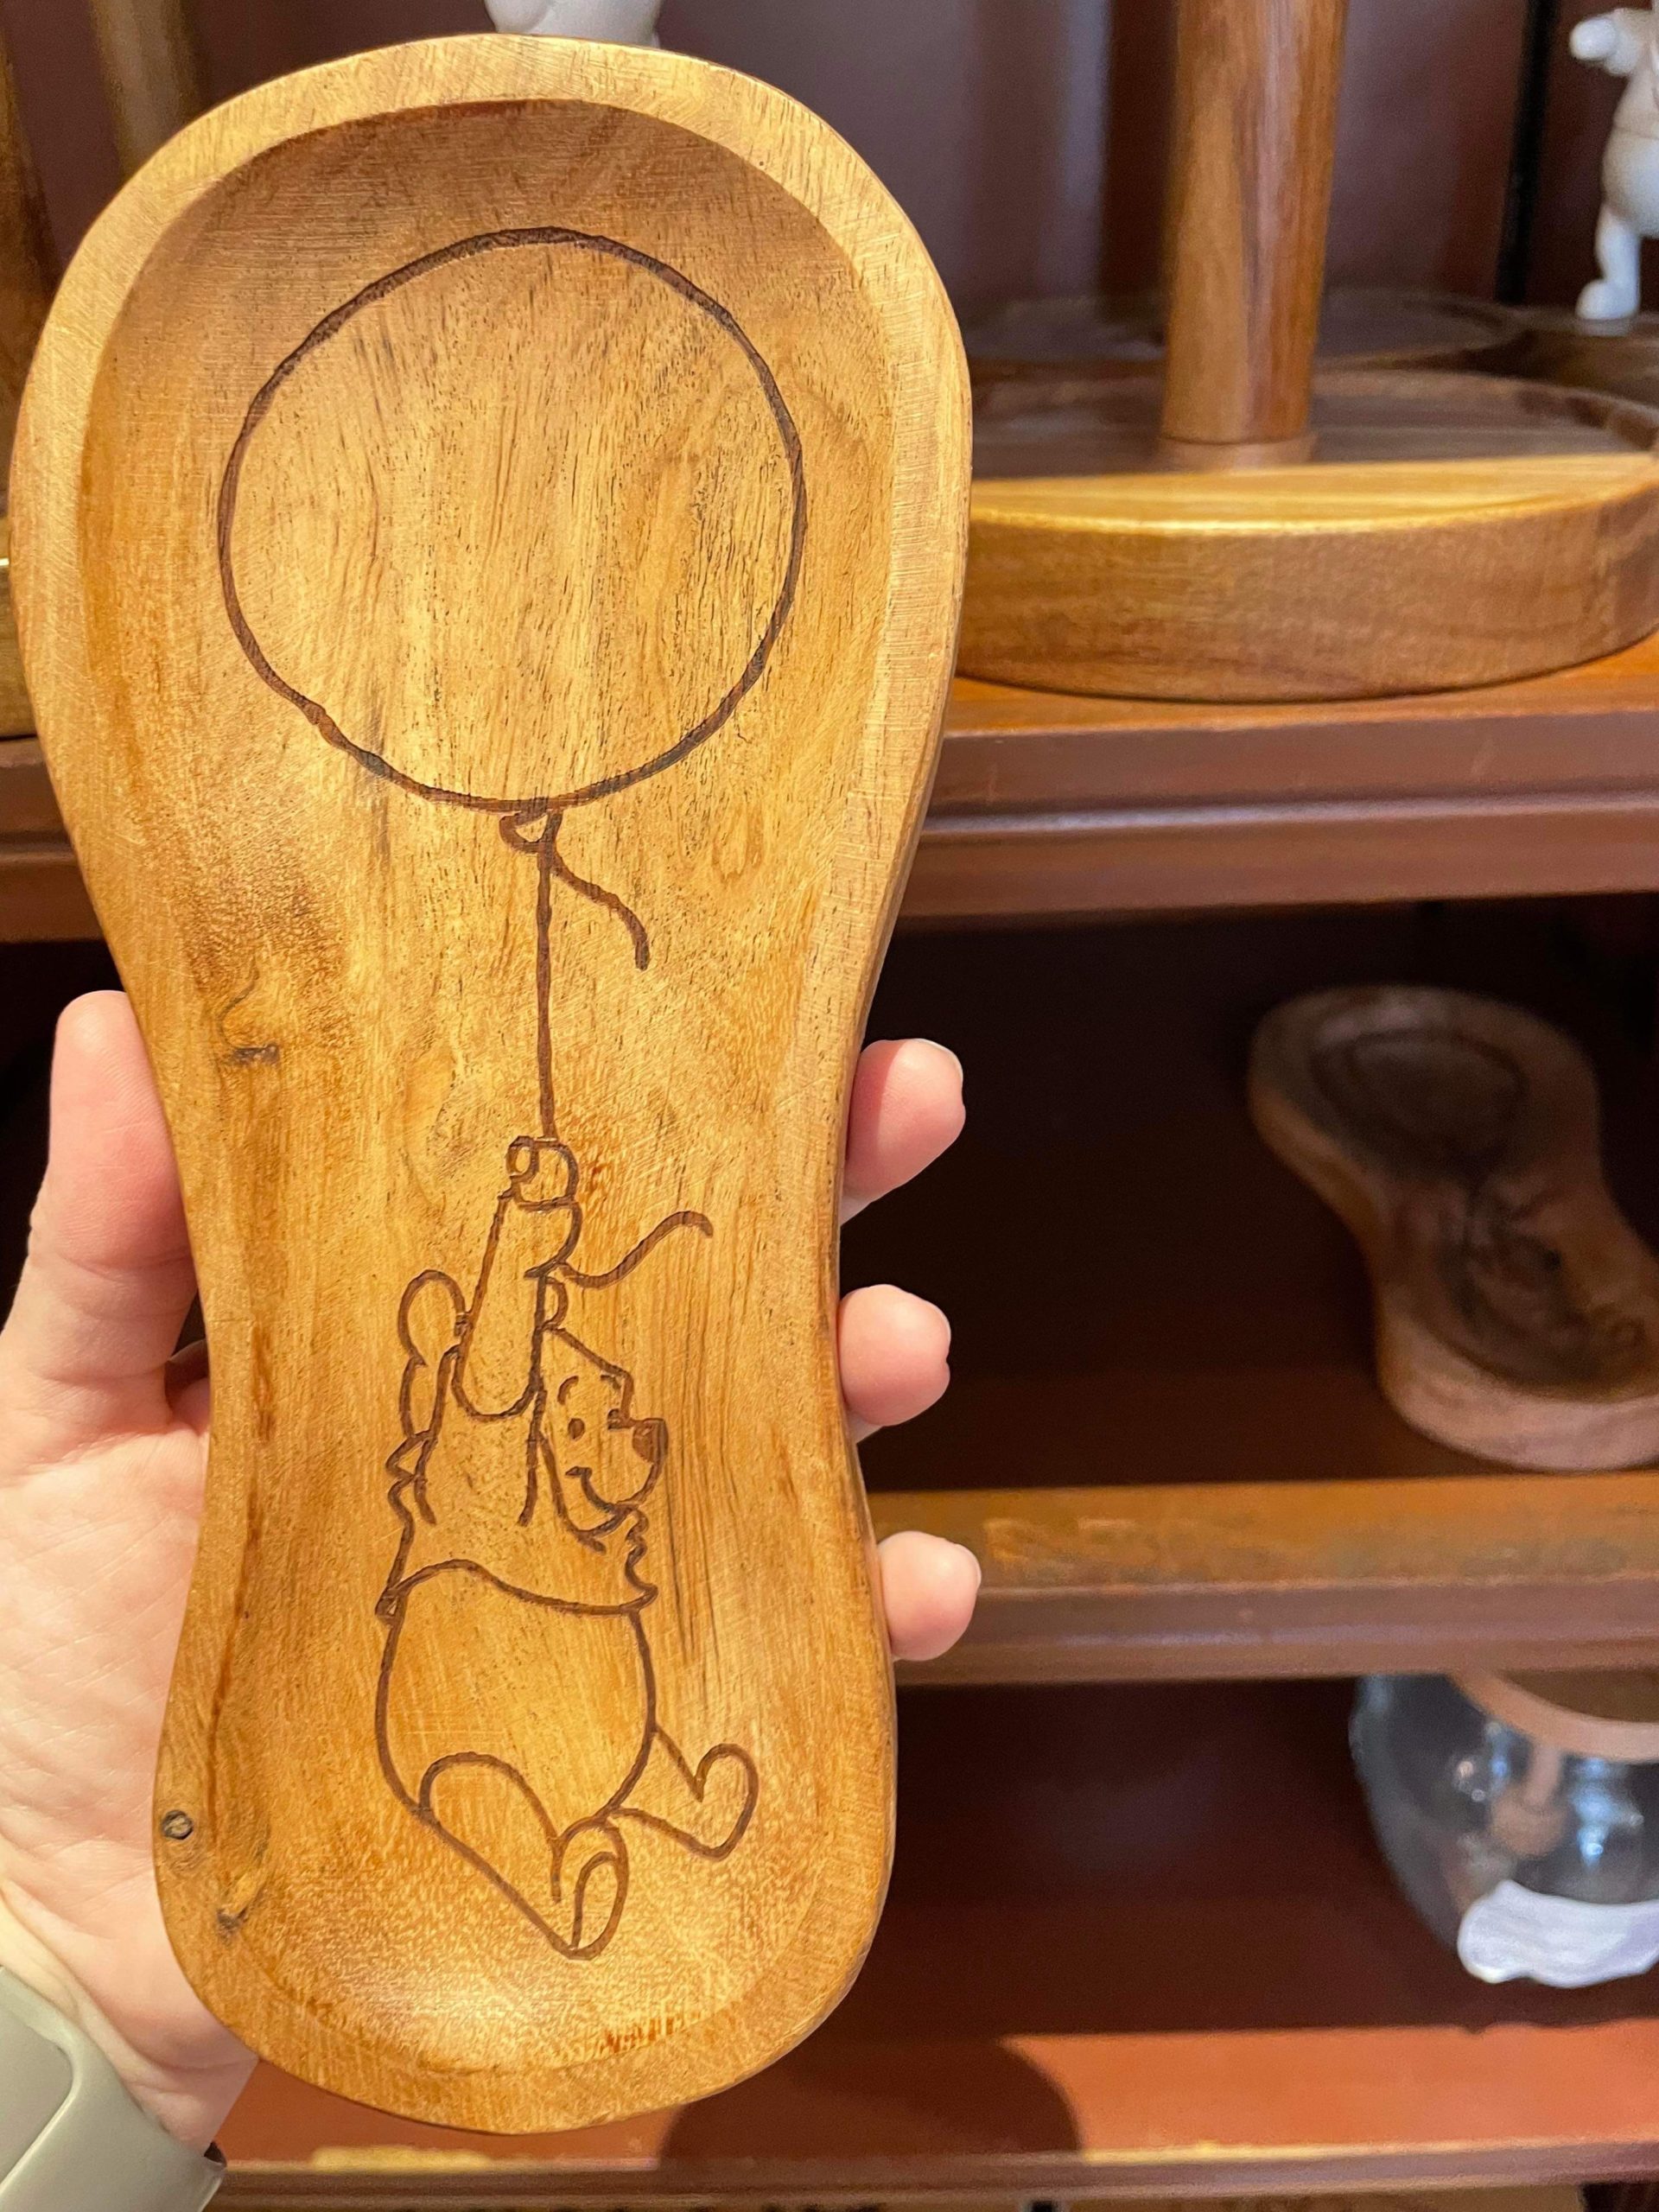 Pooh Spoon rest